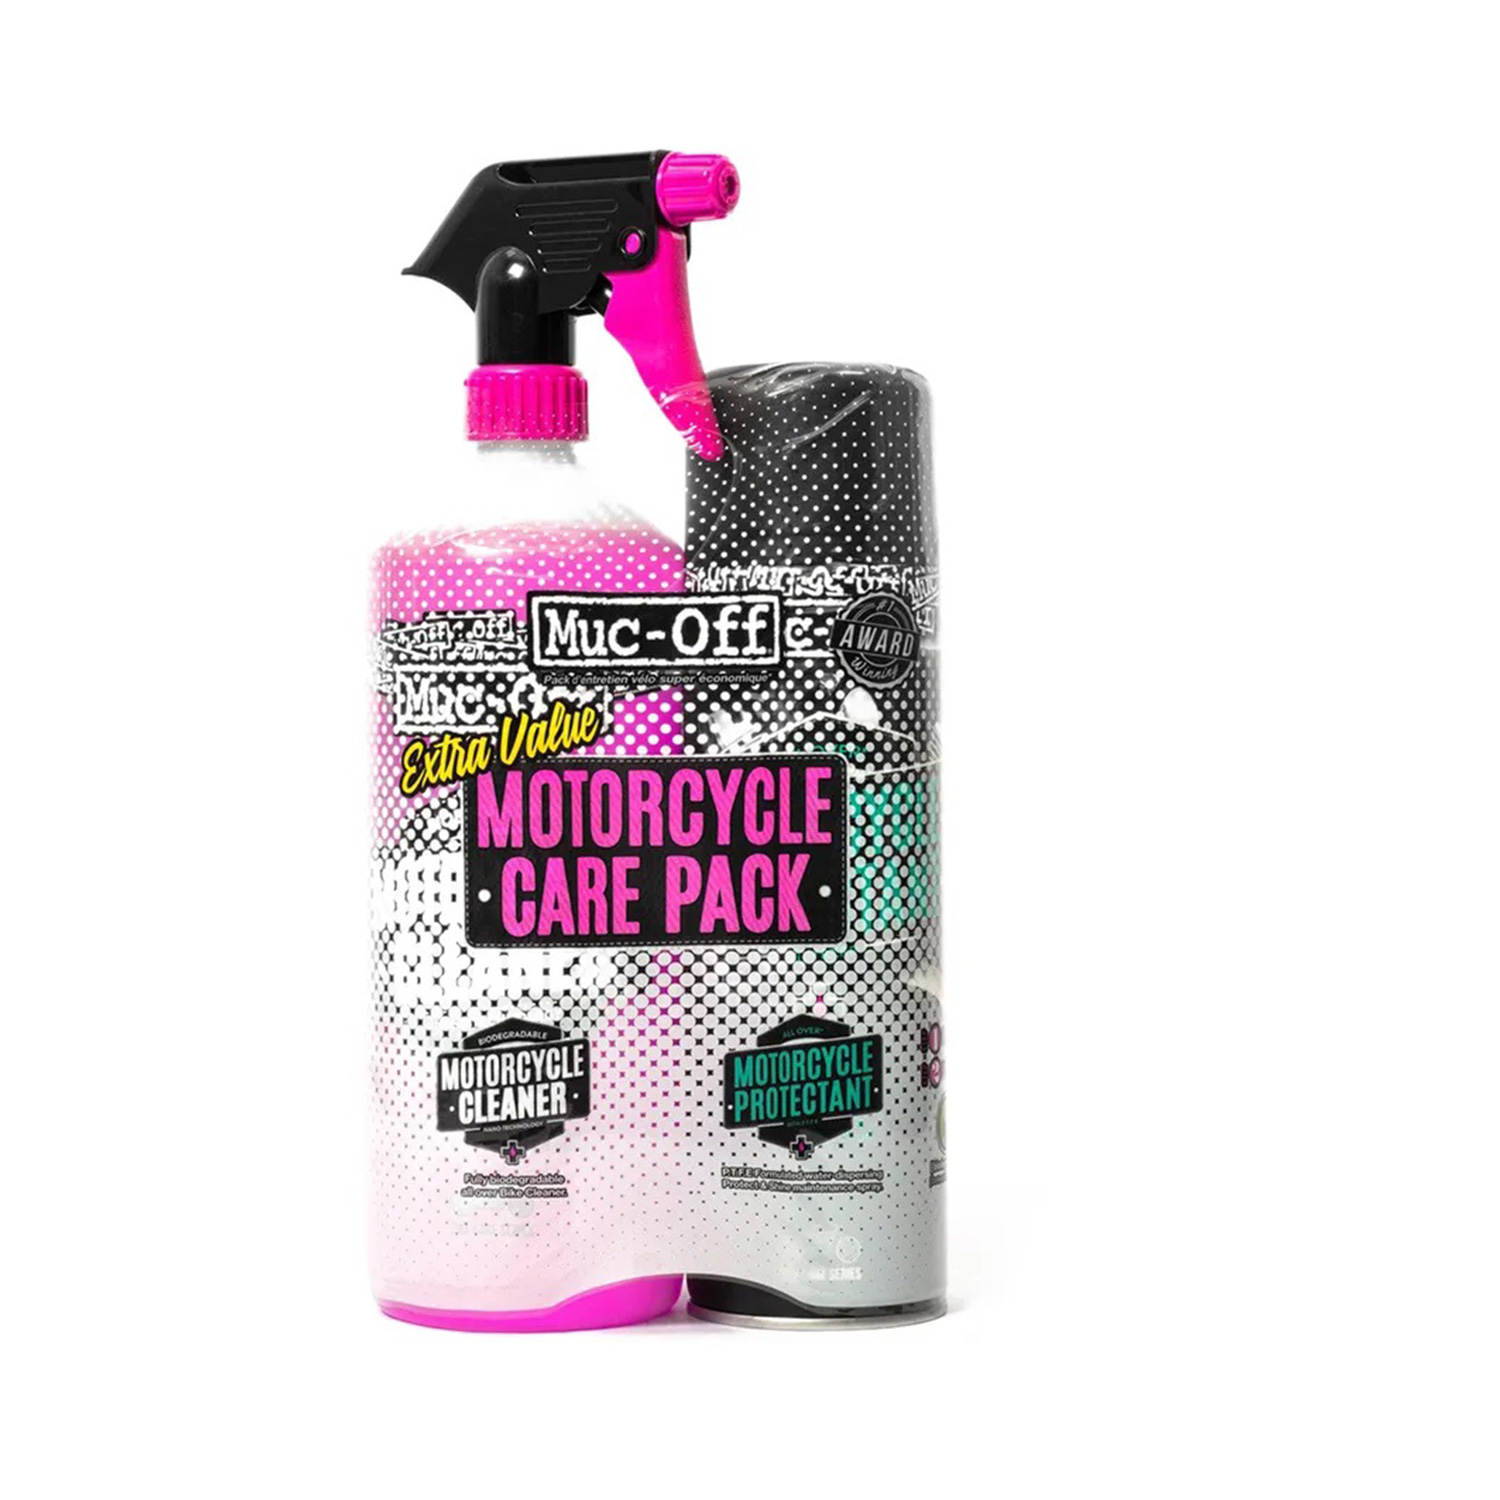 Muc-Off Motorcycle Care Duo Kit Size